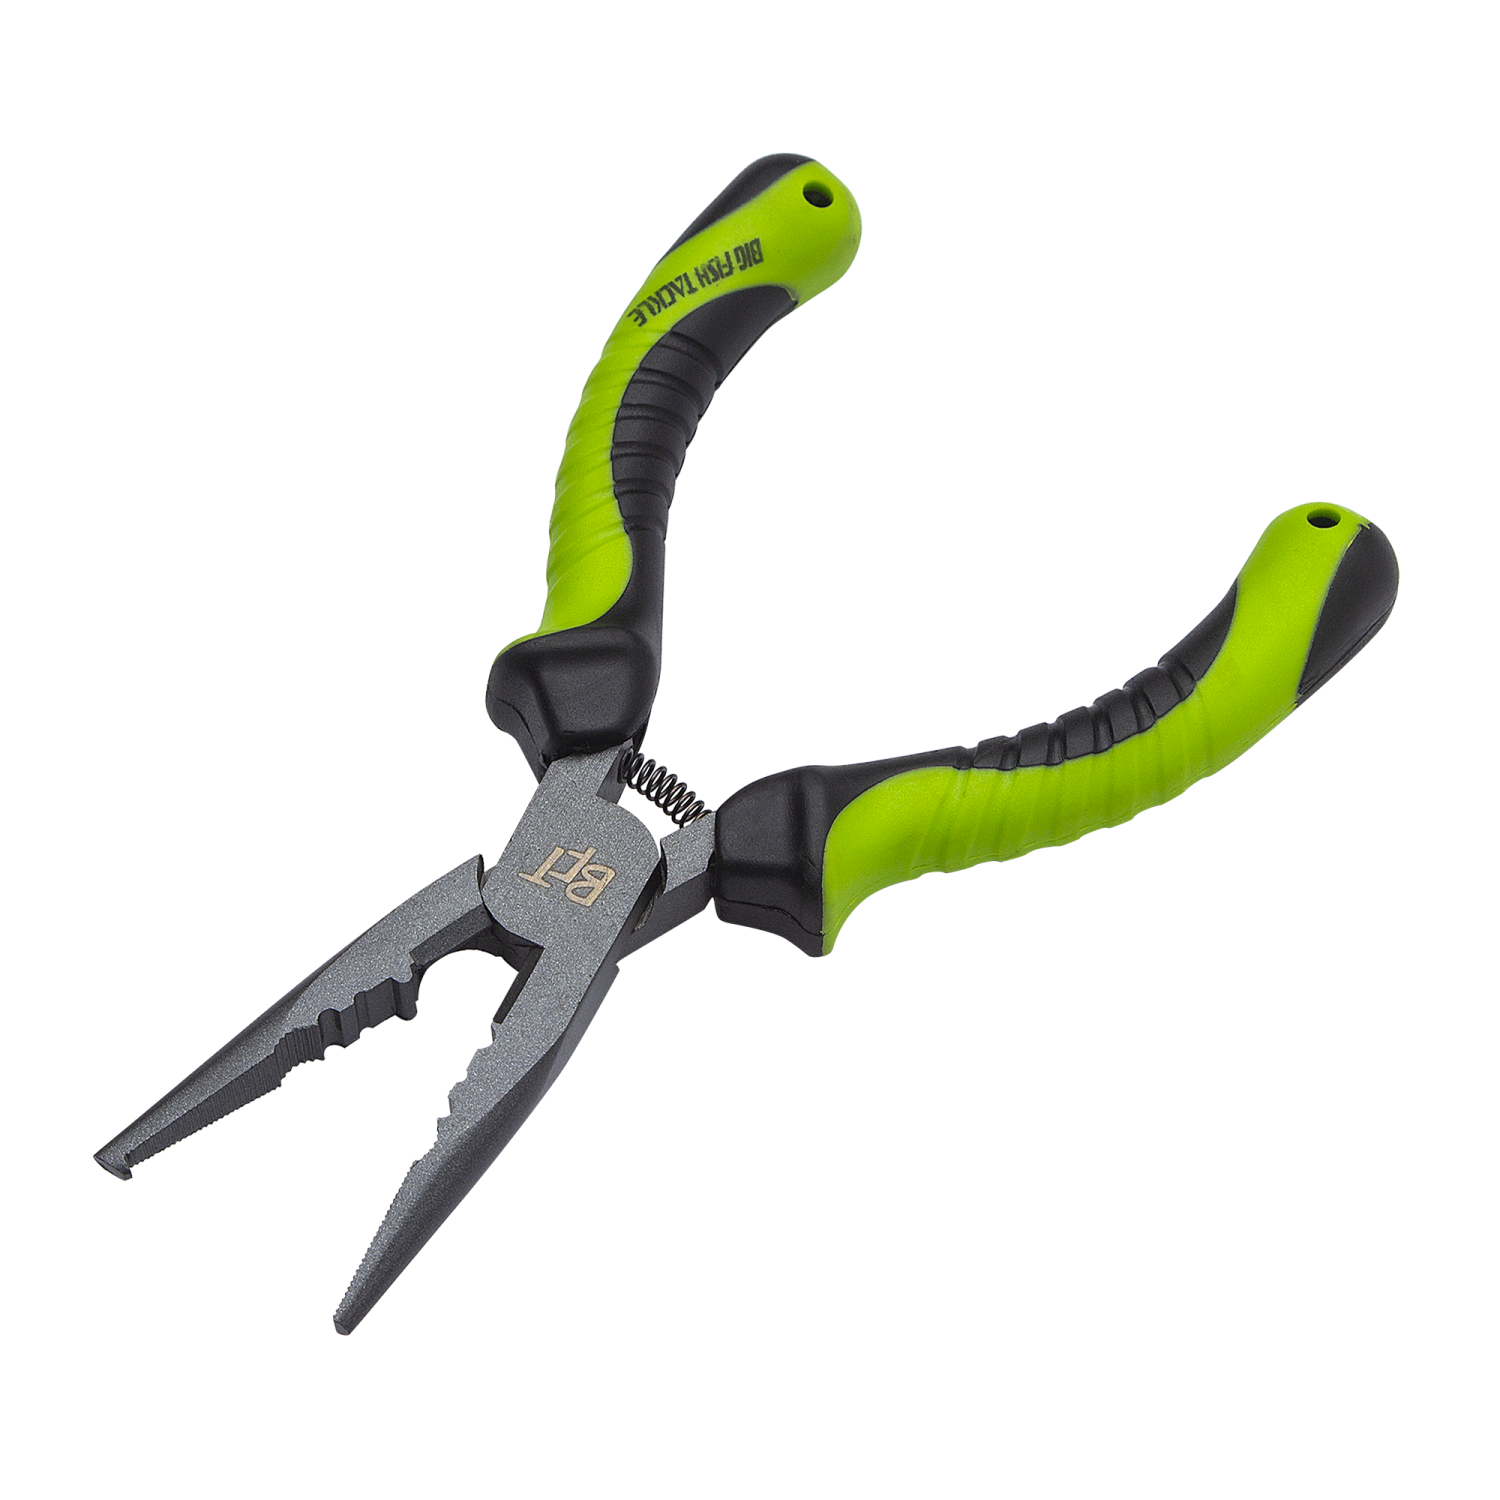 Рыболовные плоскогубцы BFT Split Ring Pliers With Cutter 17см ingbont multifunction diagonal pliers wire cutter long nose pliers side cutter cable shears electrician professional tools